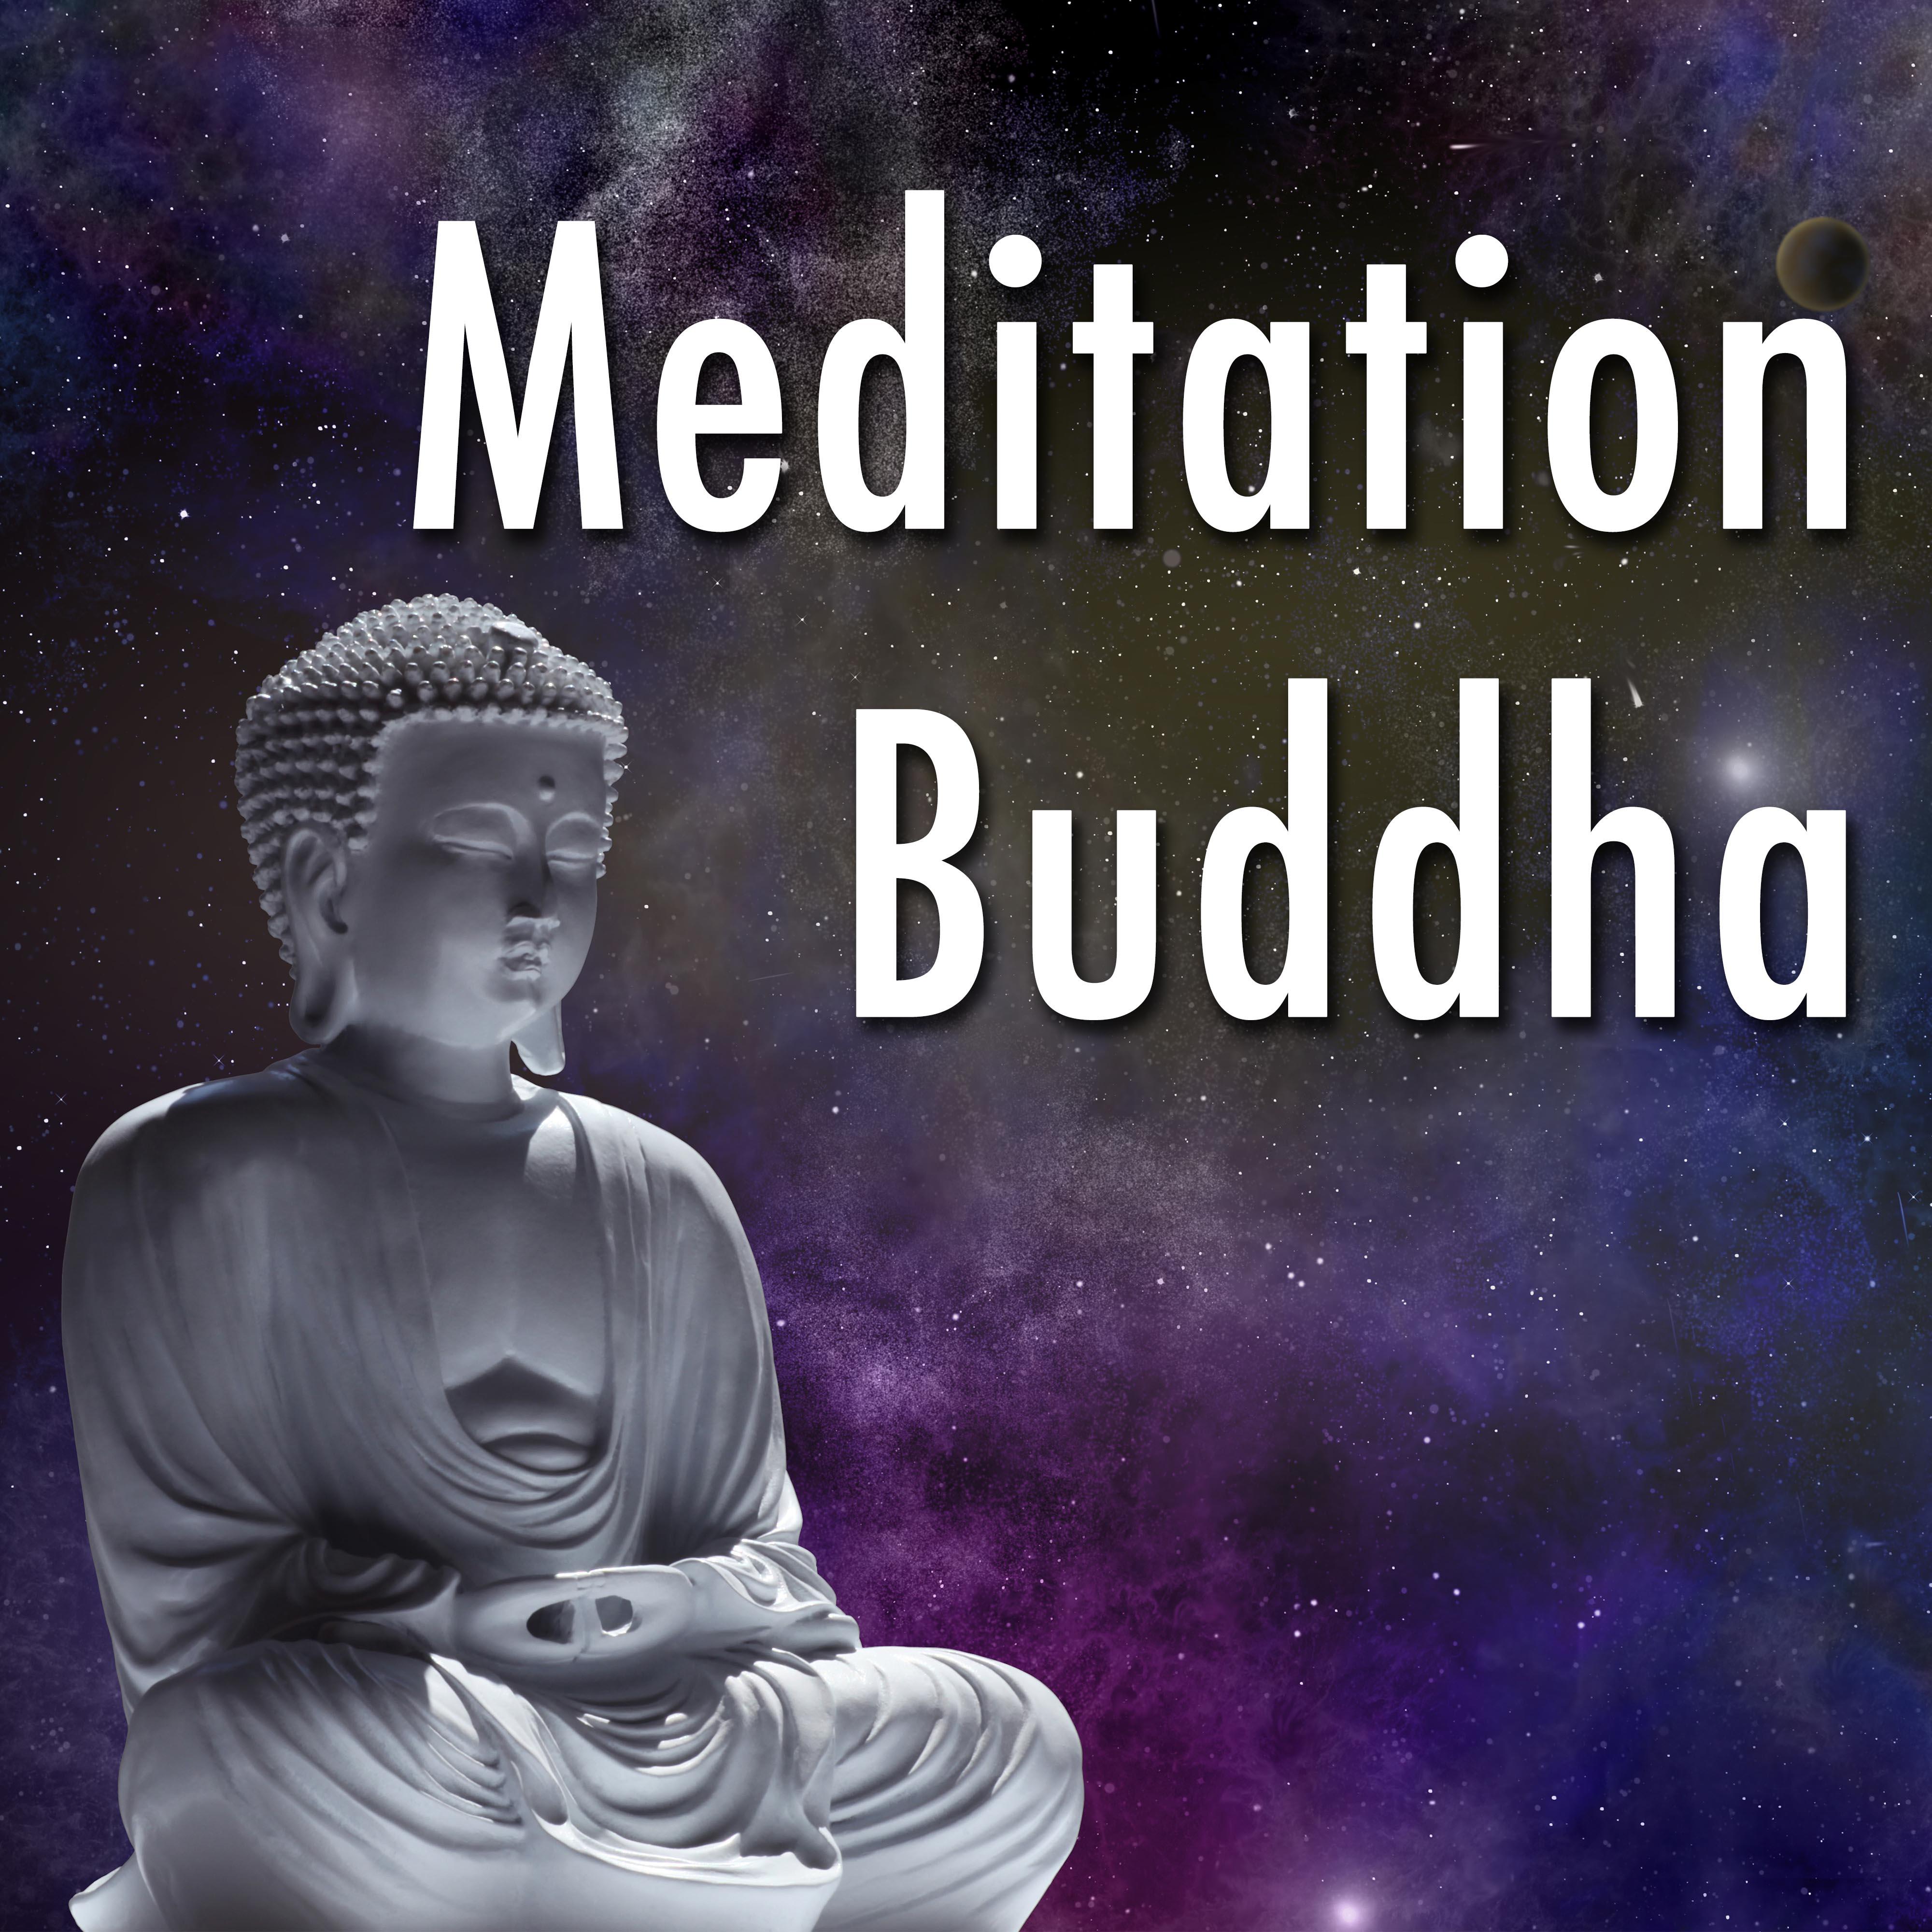 Meditation Buddha: Relaxing Piano Melodies for Calm, Serenity and Peace with Nature Sounds and New Age Music with Shakuhachi Flute